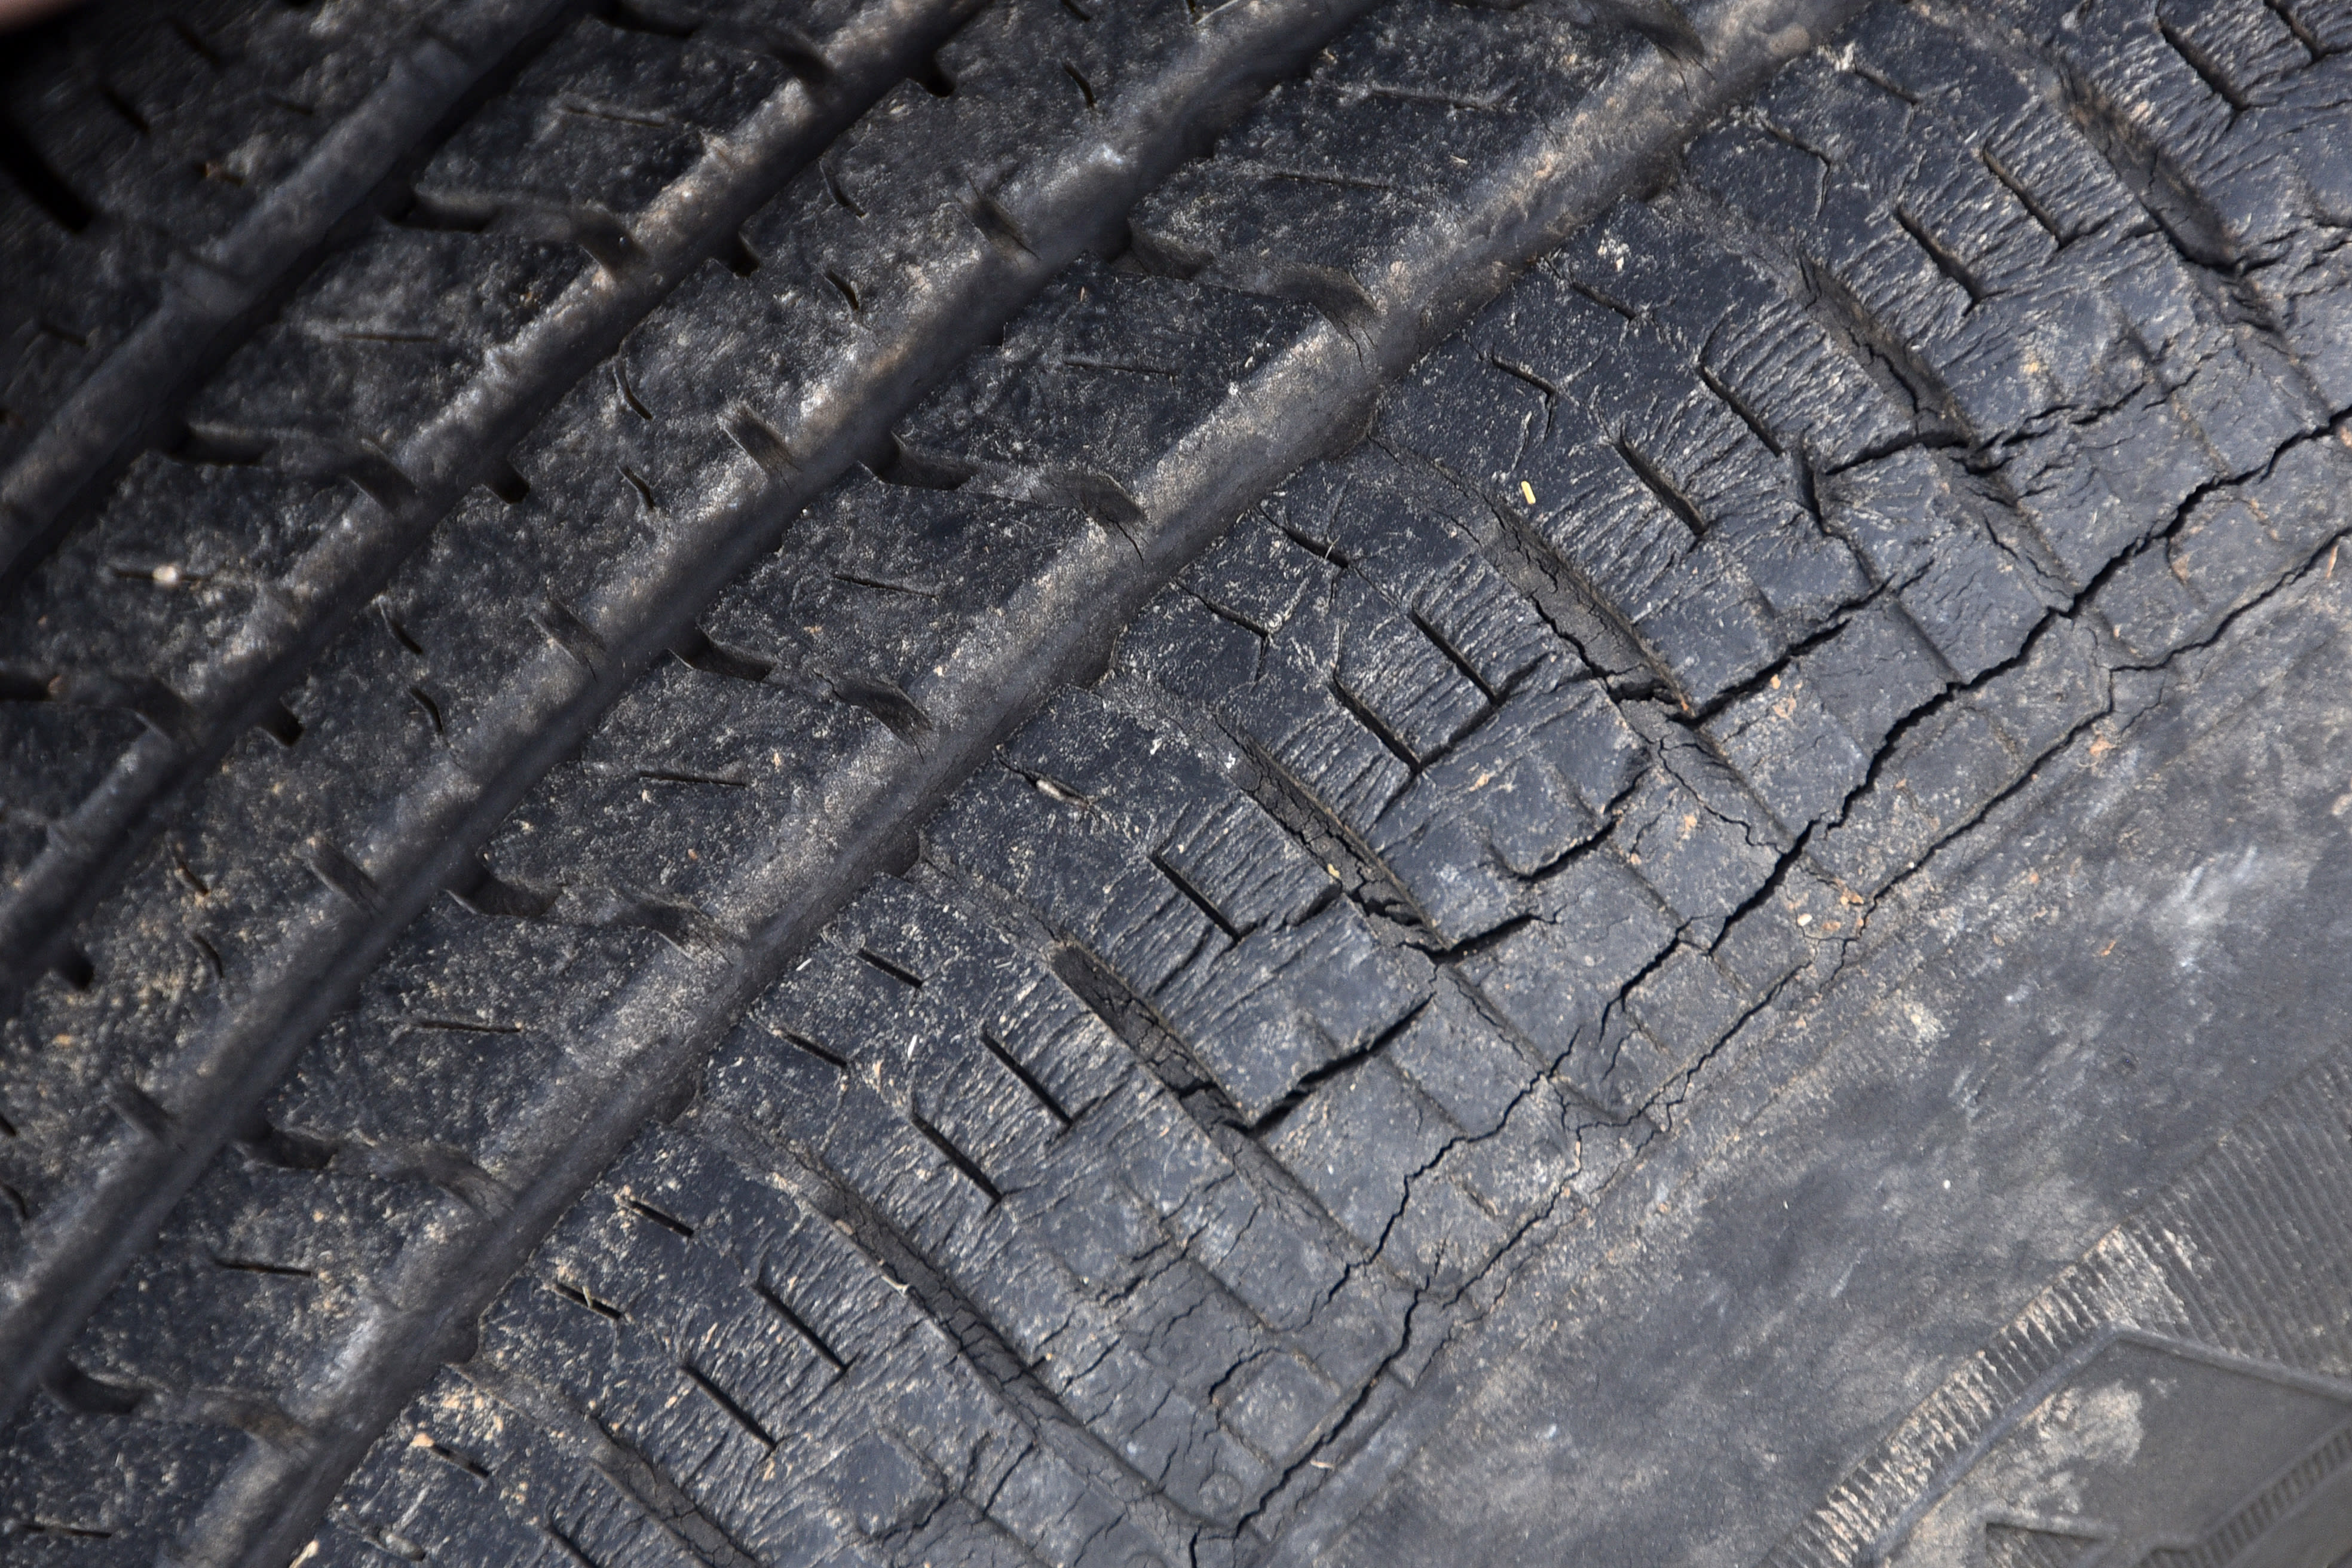 dry rot on a tire